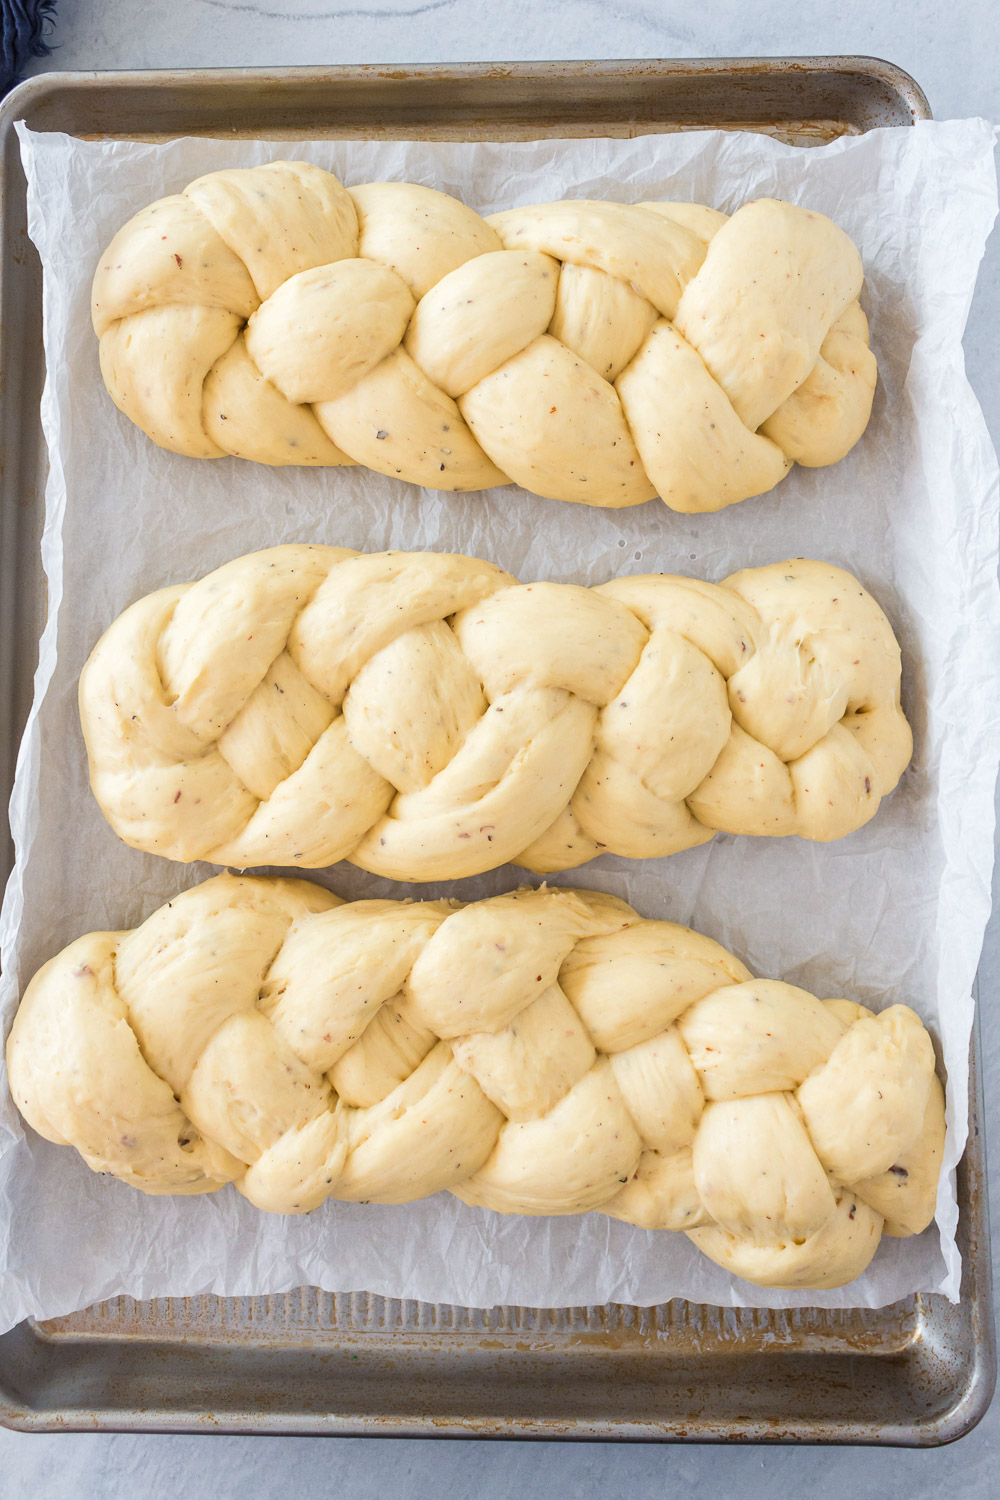 Three unbaked loafs of braided bread on a cookie sheet.